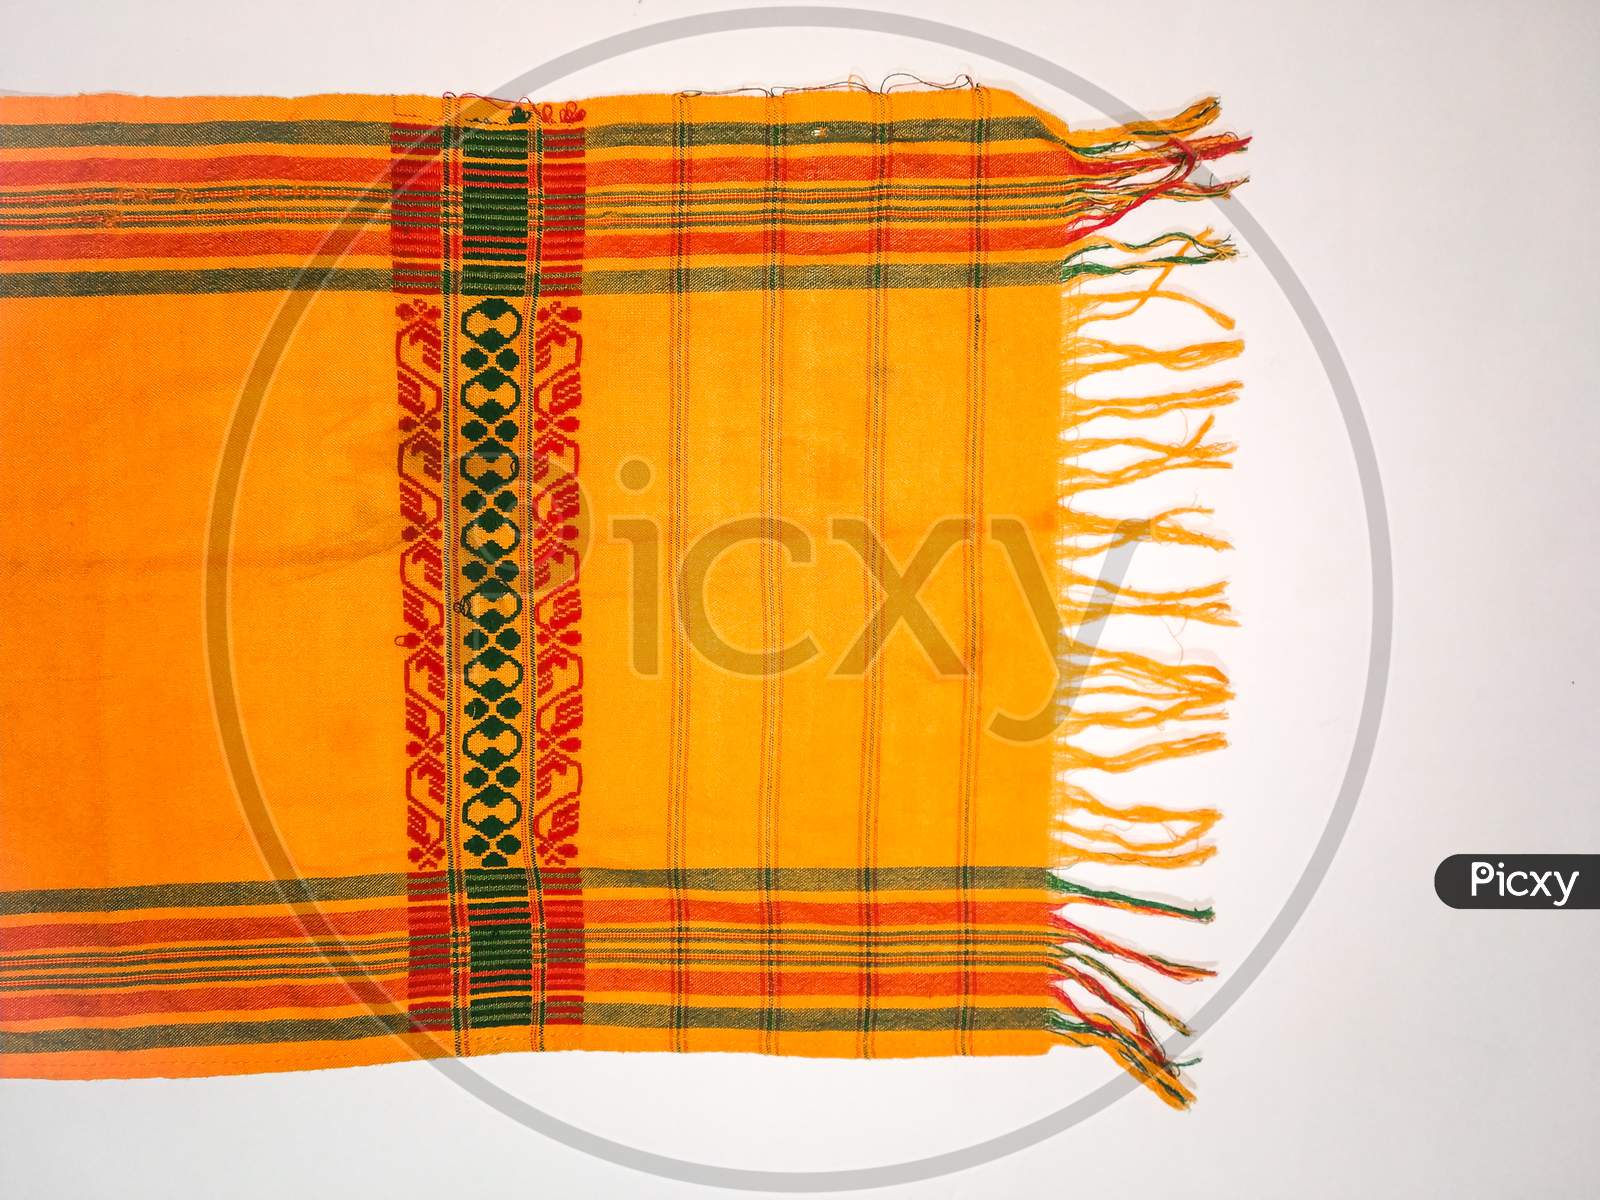 Aronai is a small Scarf, used both by Men and Women. Aronai is the sign of Boro tradition and is used to felicitate guests with honour, as a gift. In winter